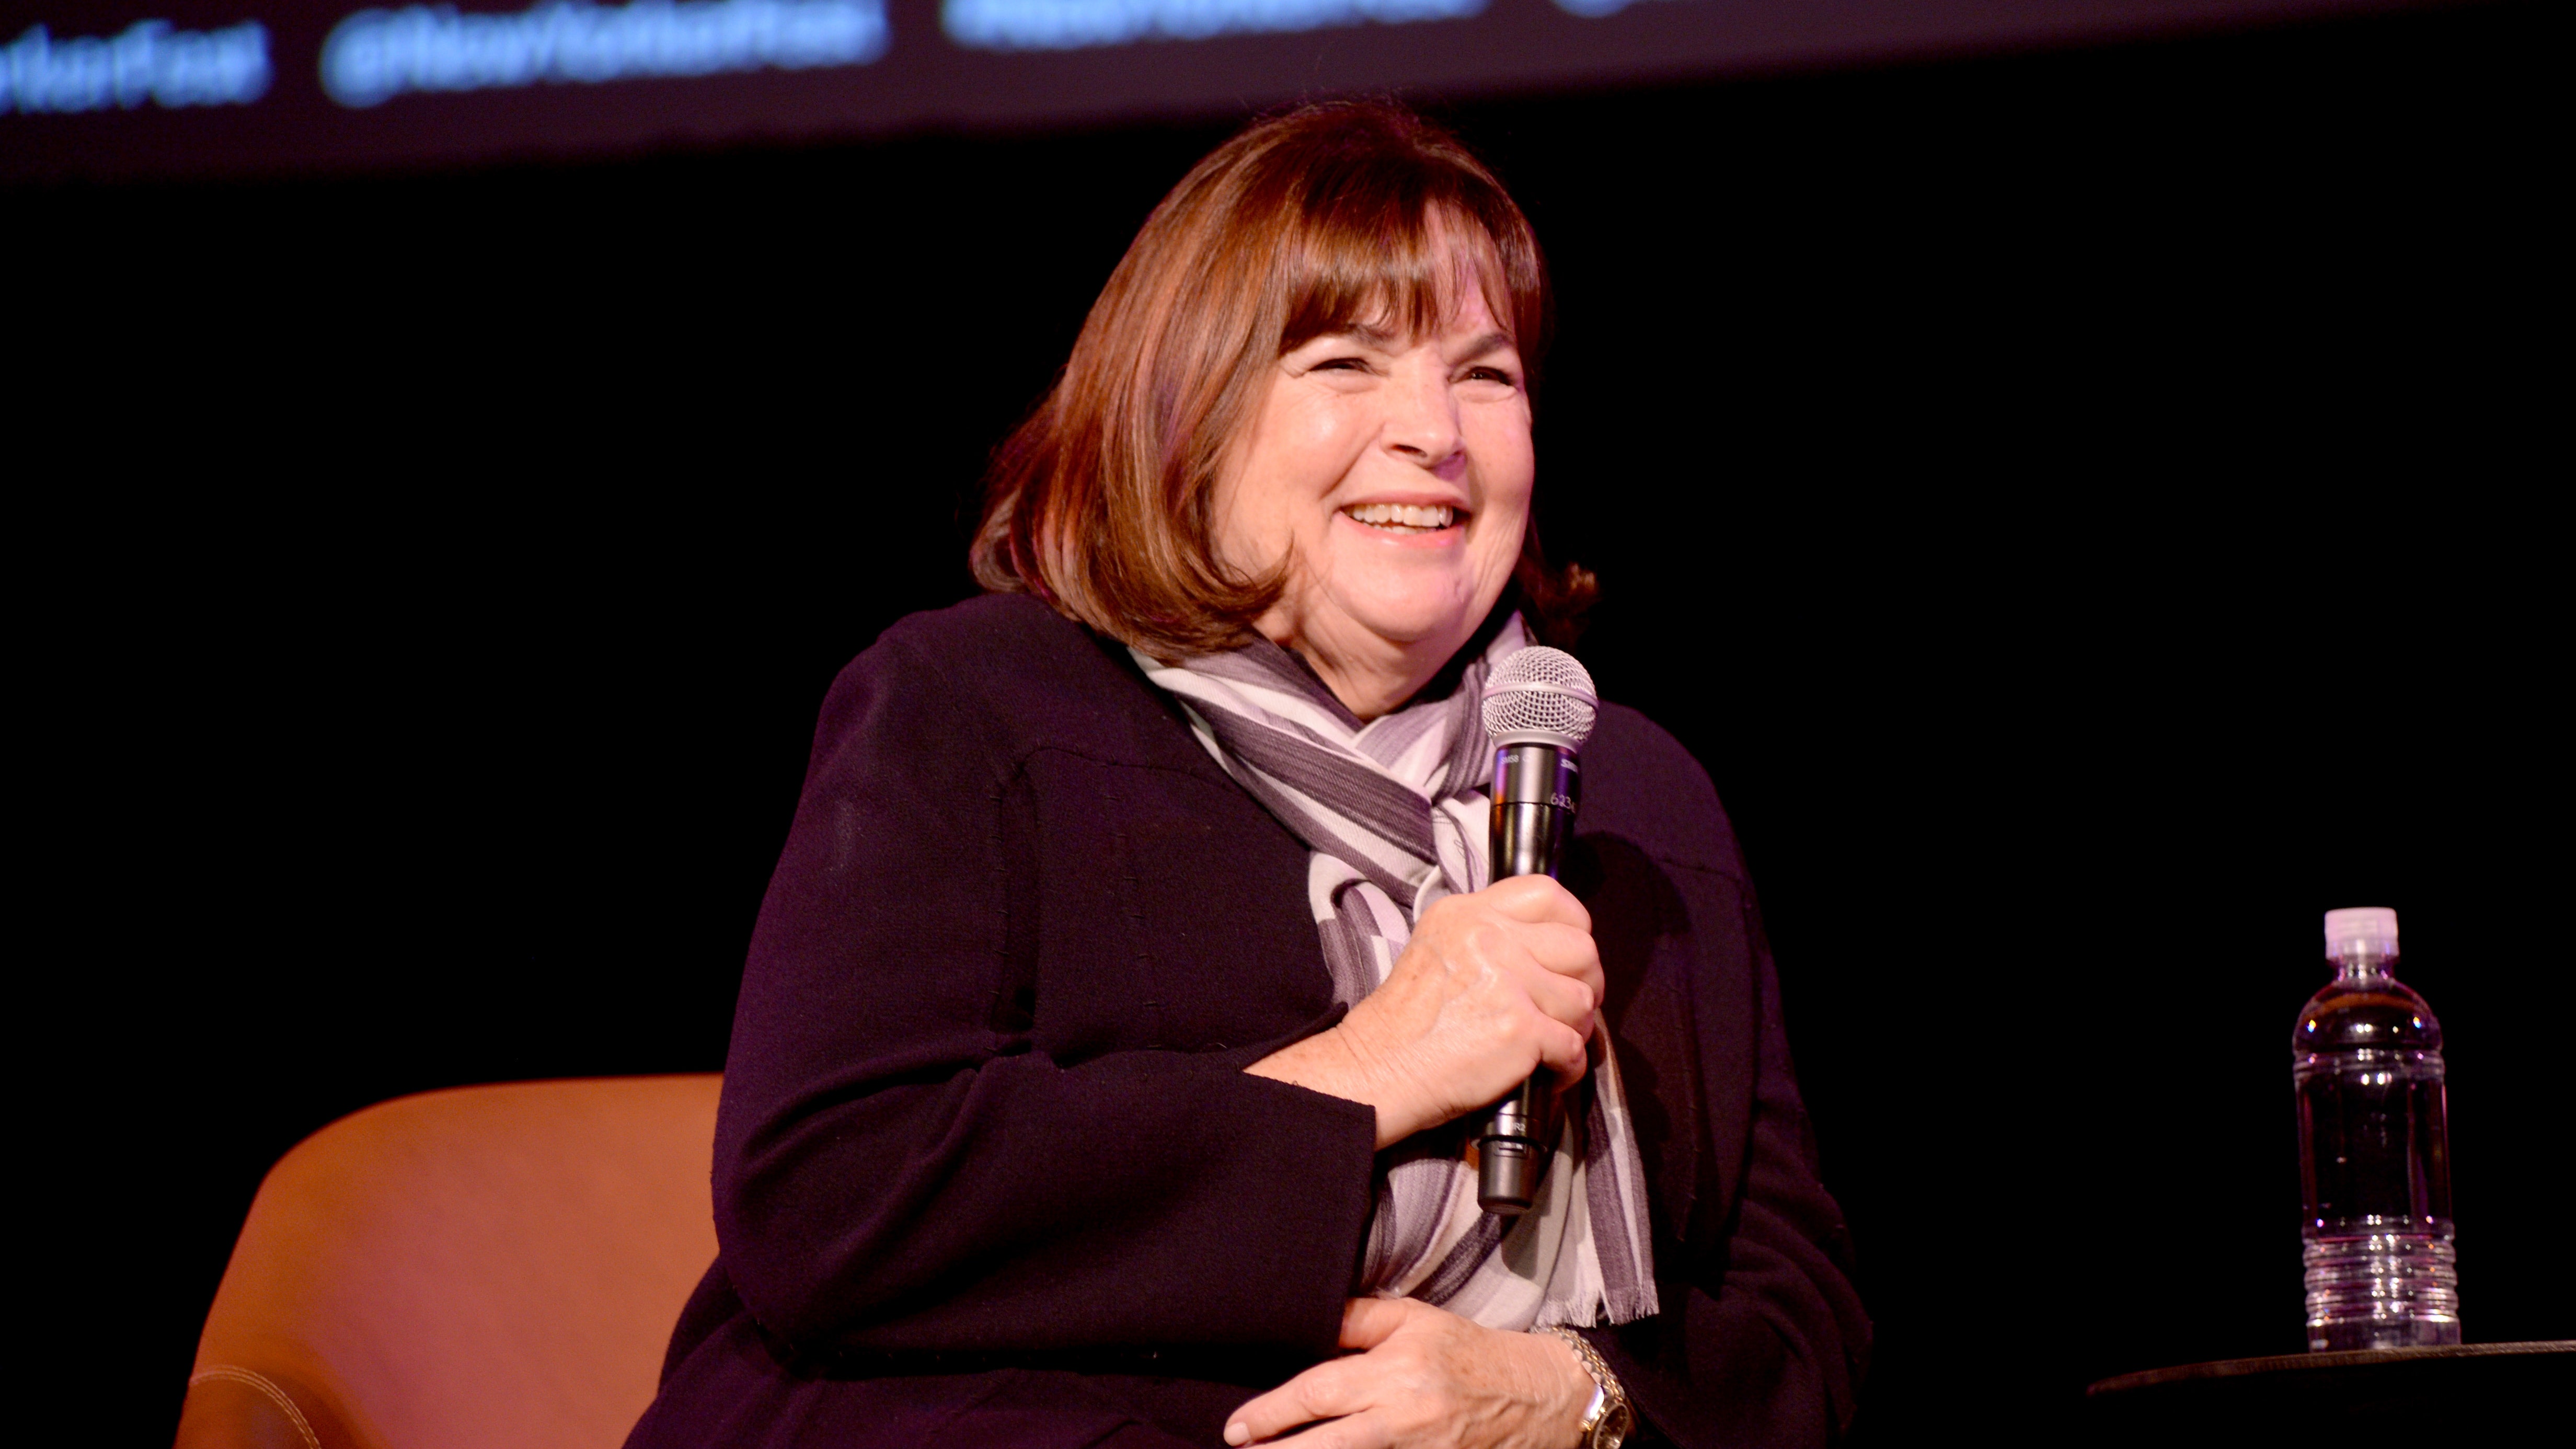 Ina Garten opens up about keeping her romance hot, admits husband accidentally sent sexy text to publicist